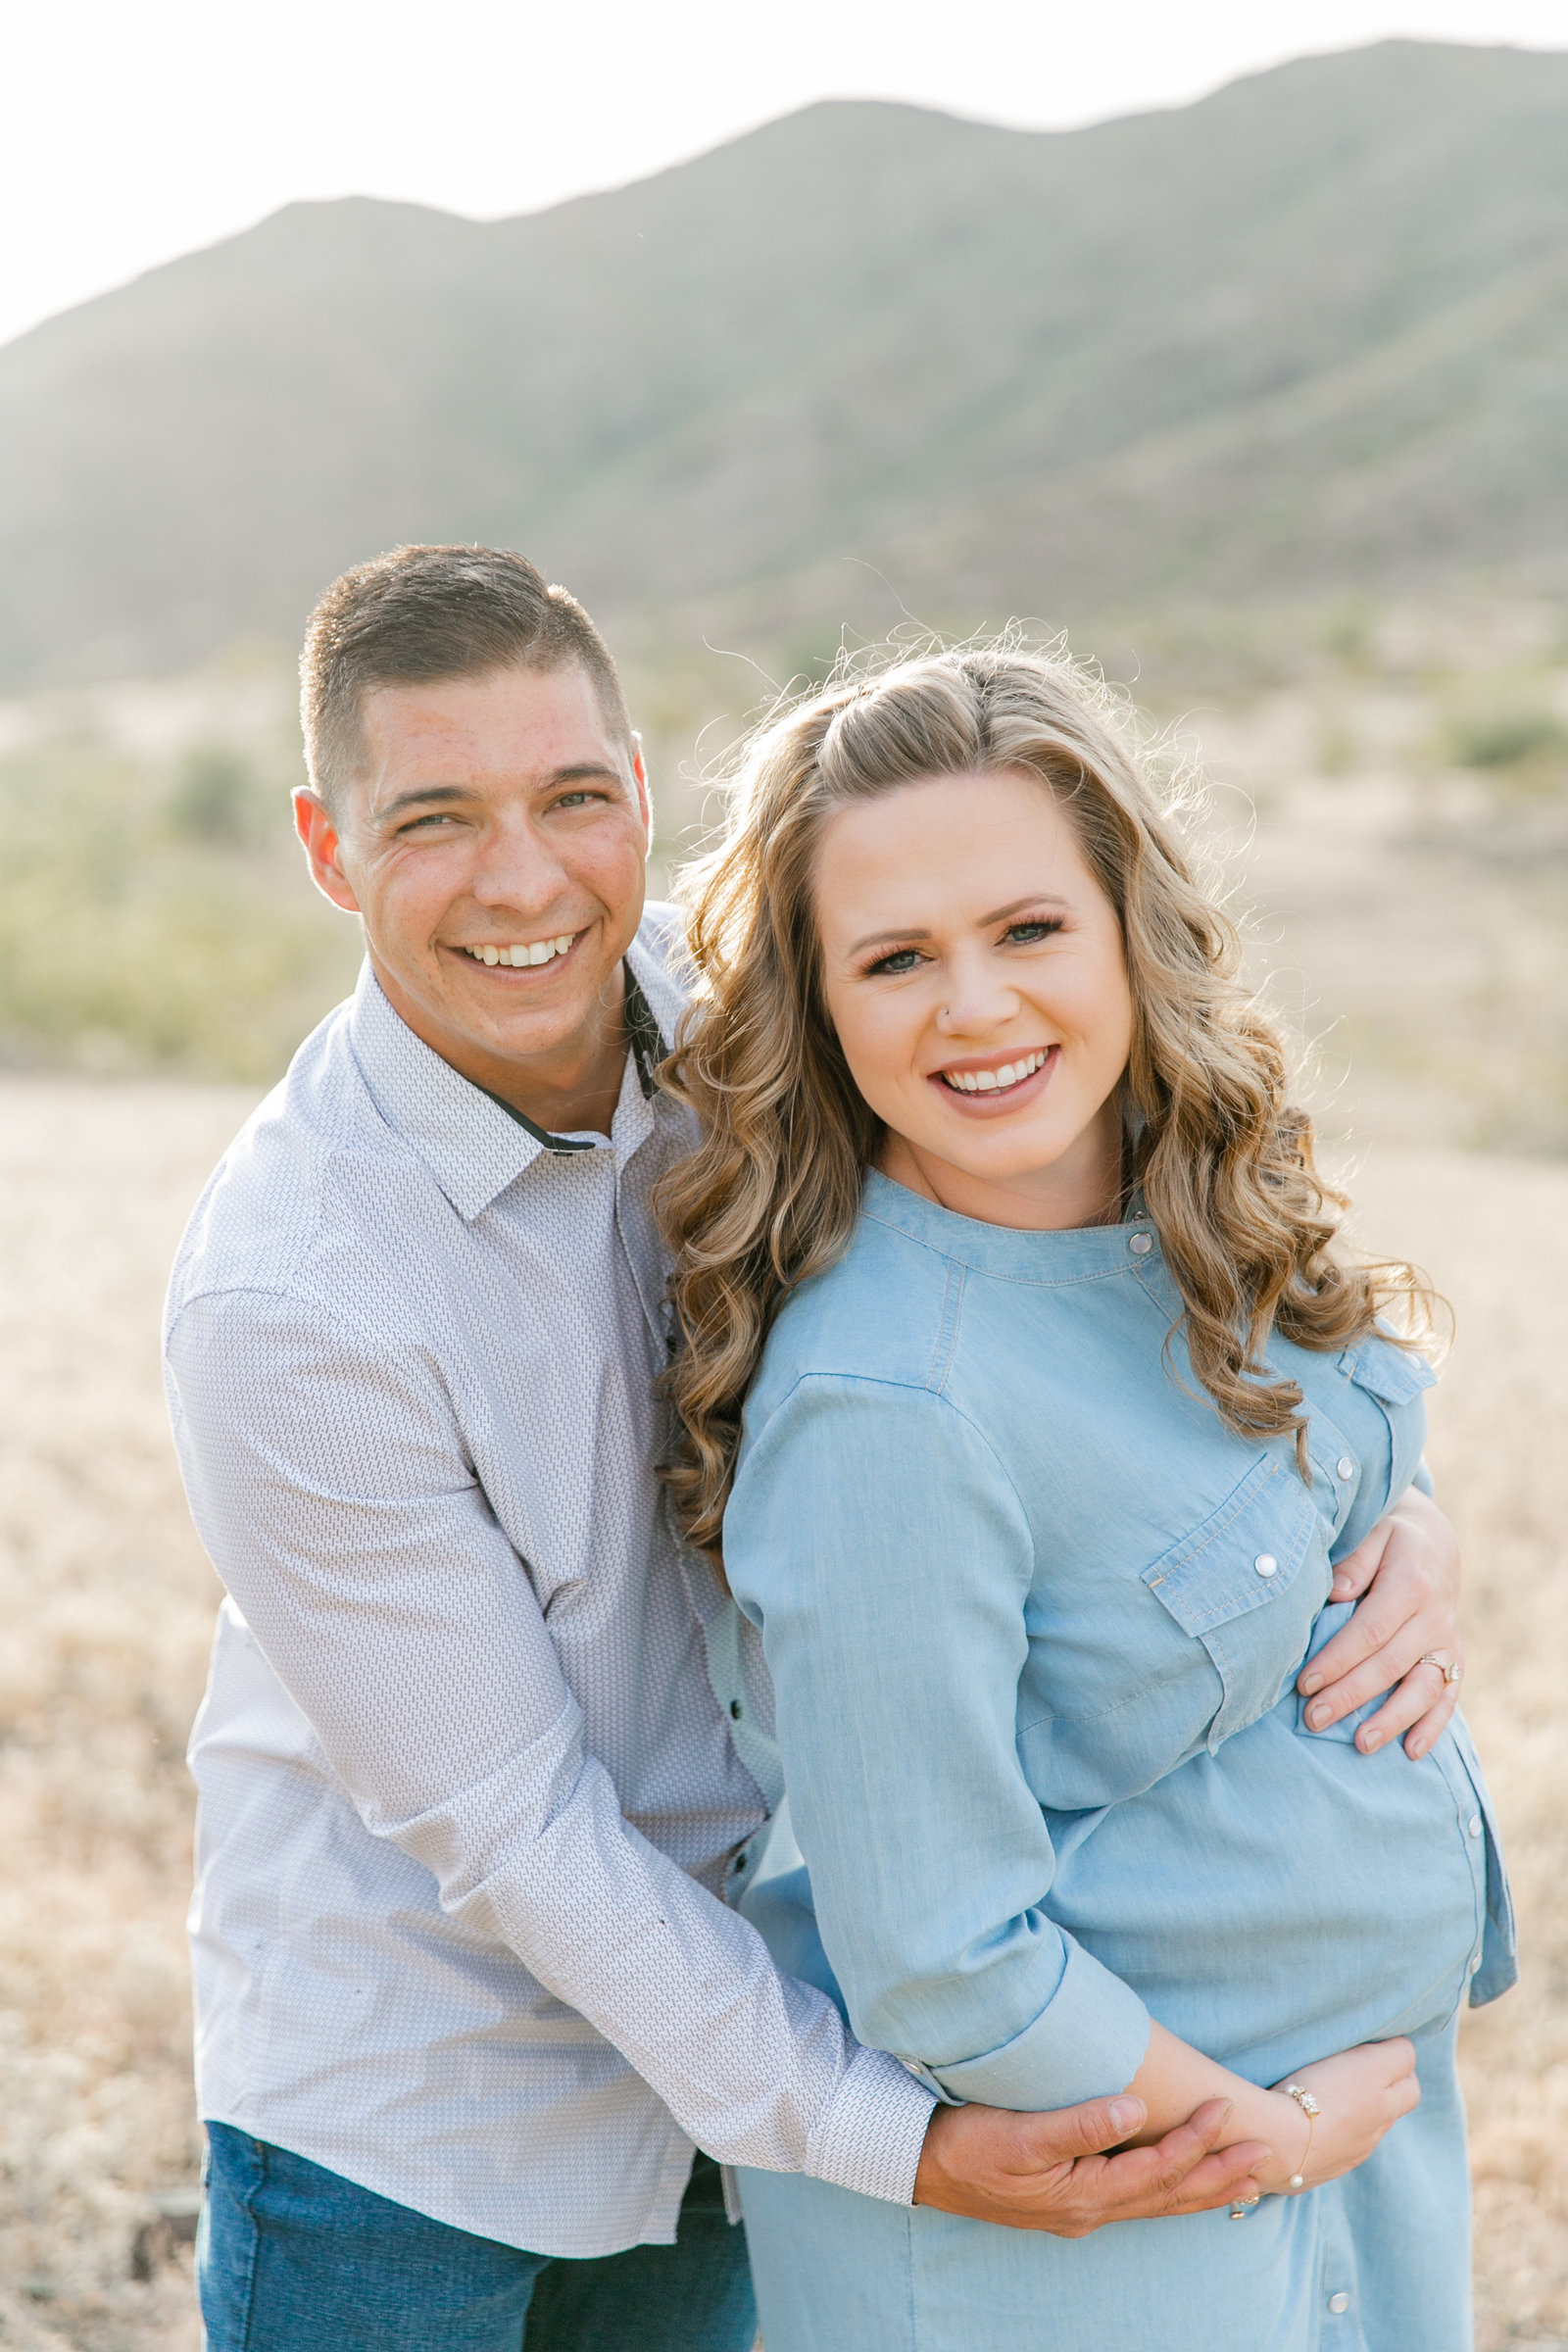 Karlie Colleen Photography - Arizona Maternity Photography - Brittany & Kyle-87